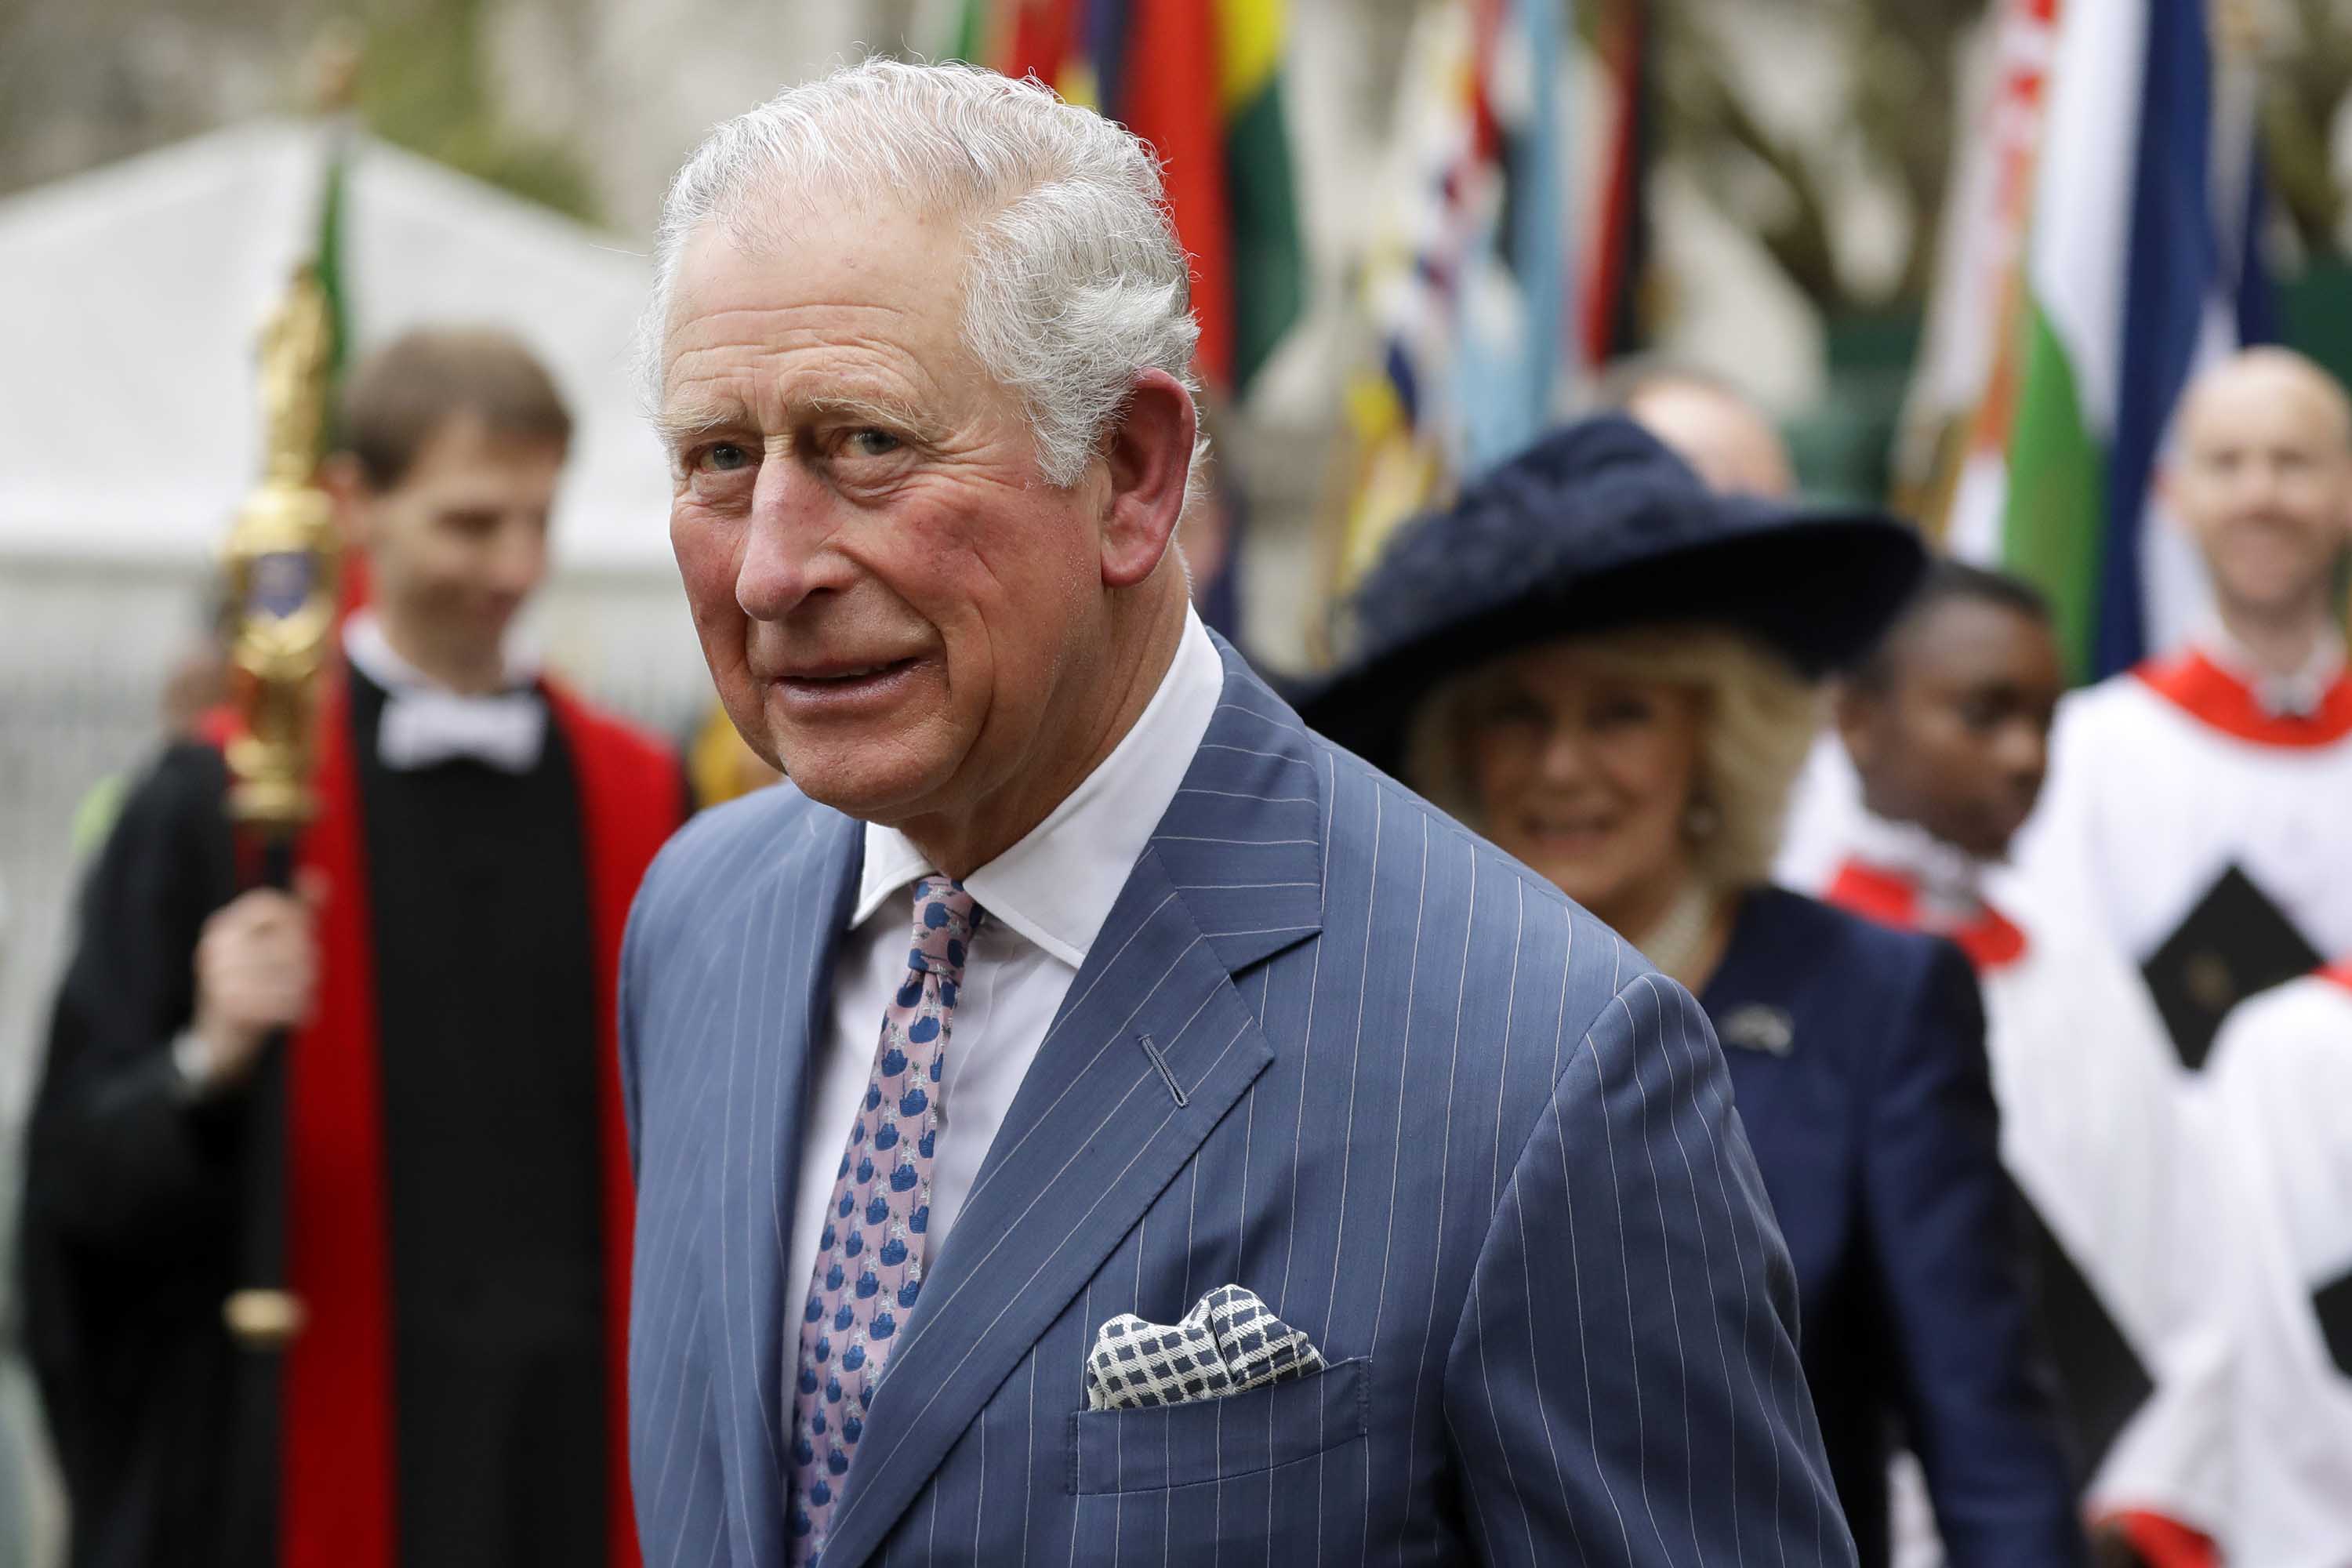 Britain's Prince Charles and Camilla, Duchess of Cornwall, background, leave after attending the annual Commonwealth Day service at Westminster Abbey in London, England, on March 9.